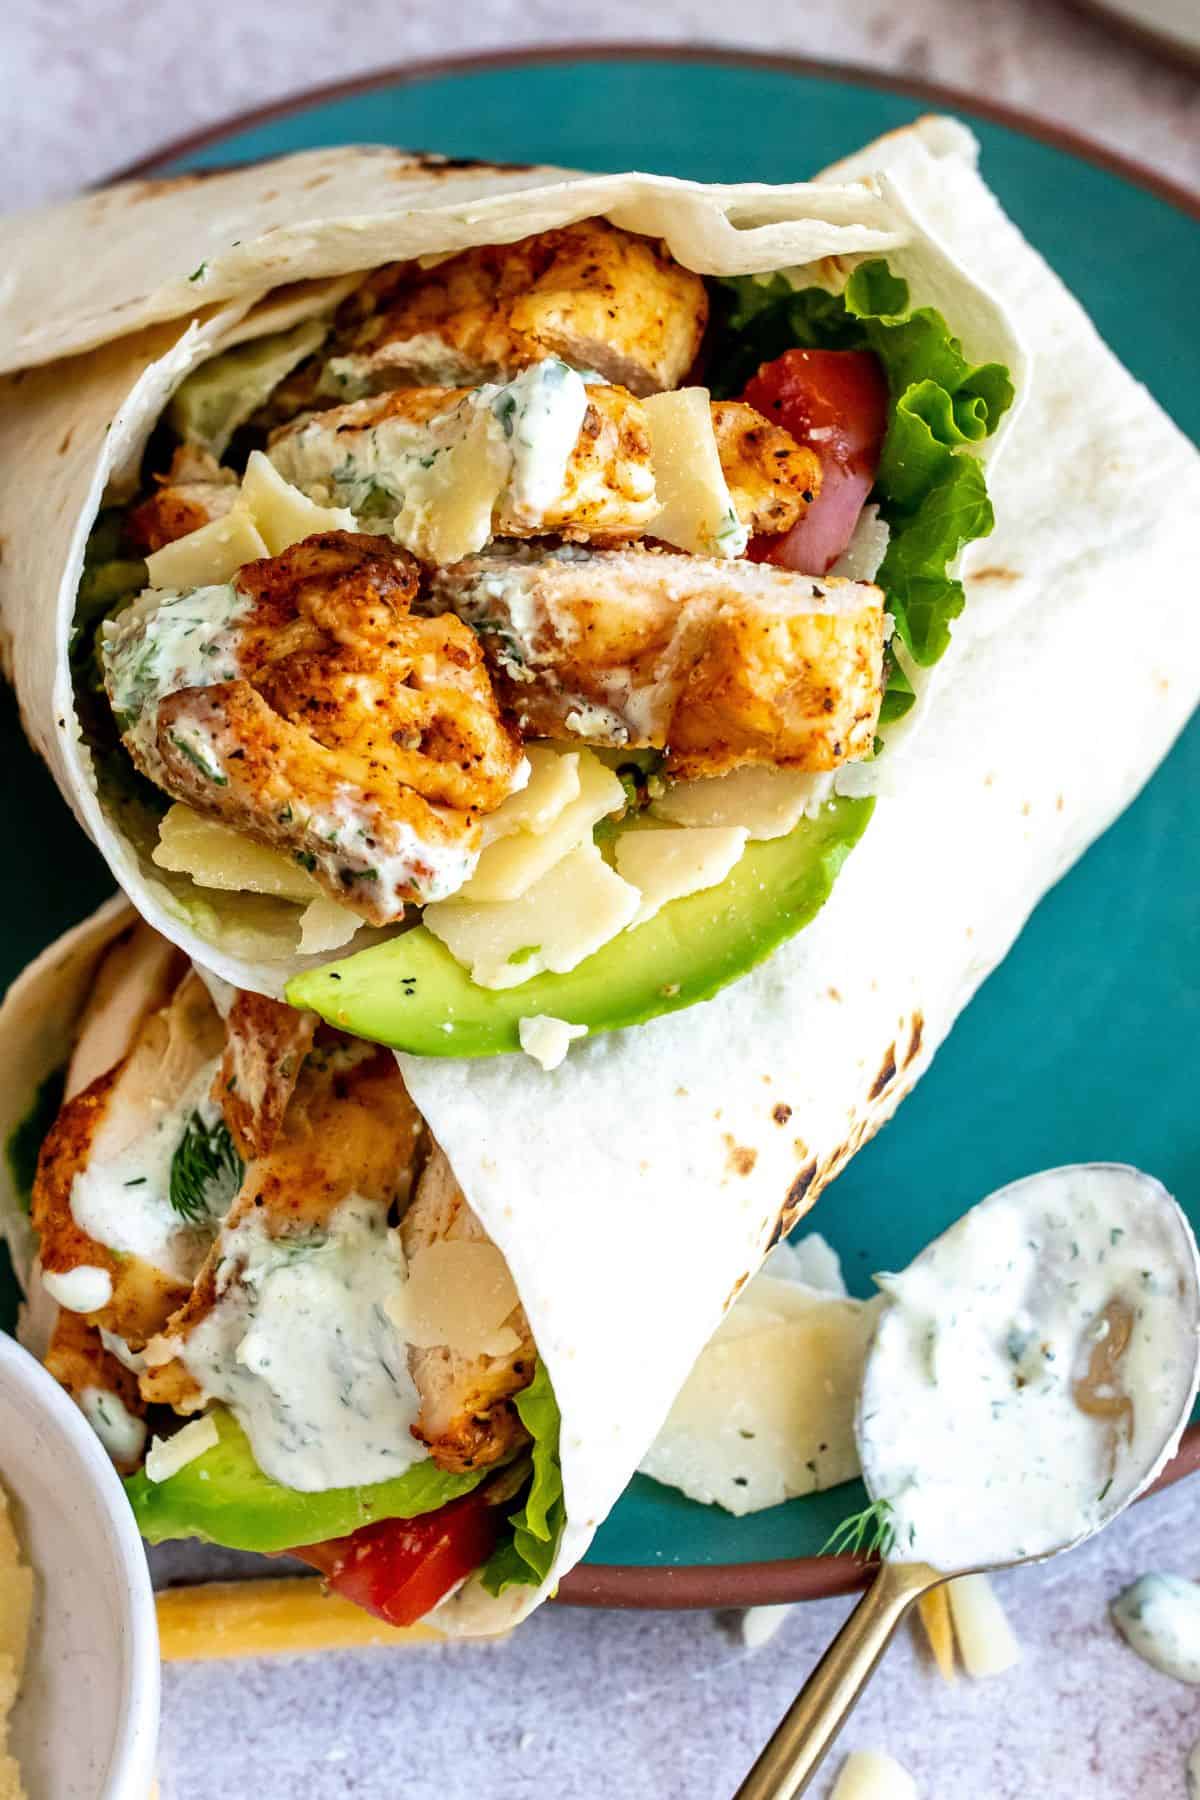 An image of two grilled chicken wraps on a plate with a spoon with ranch on the side.